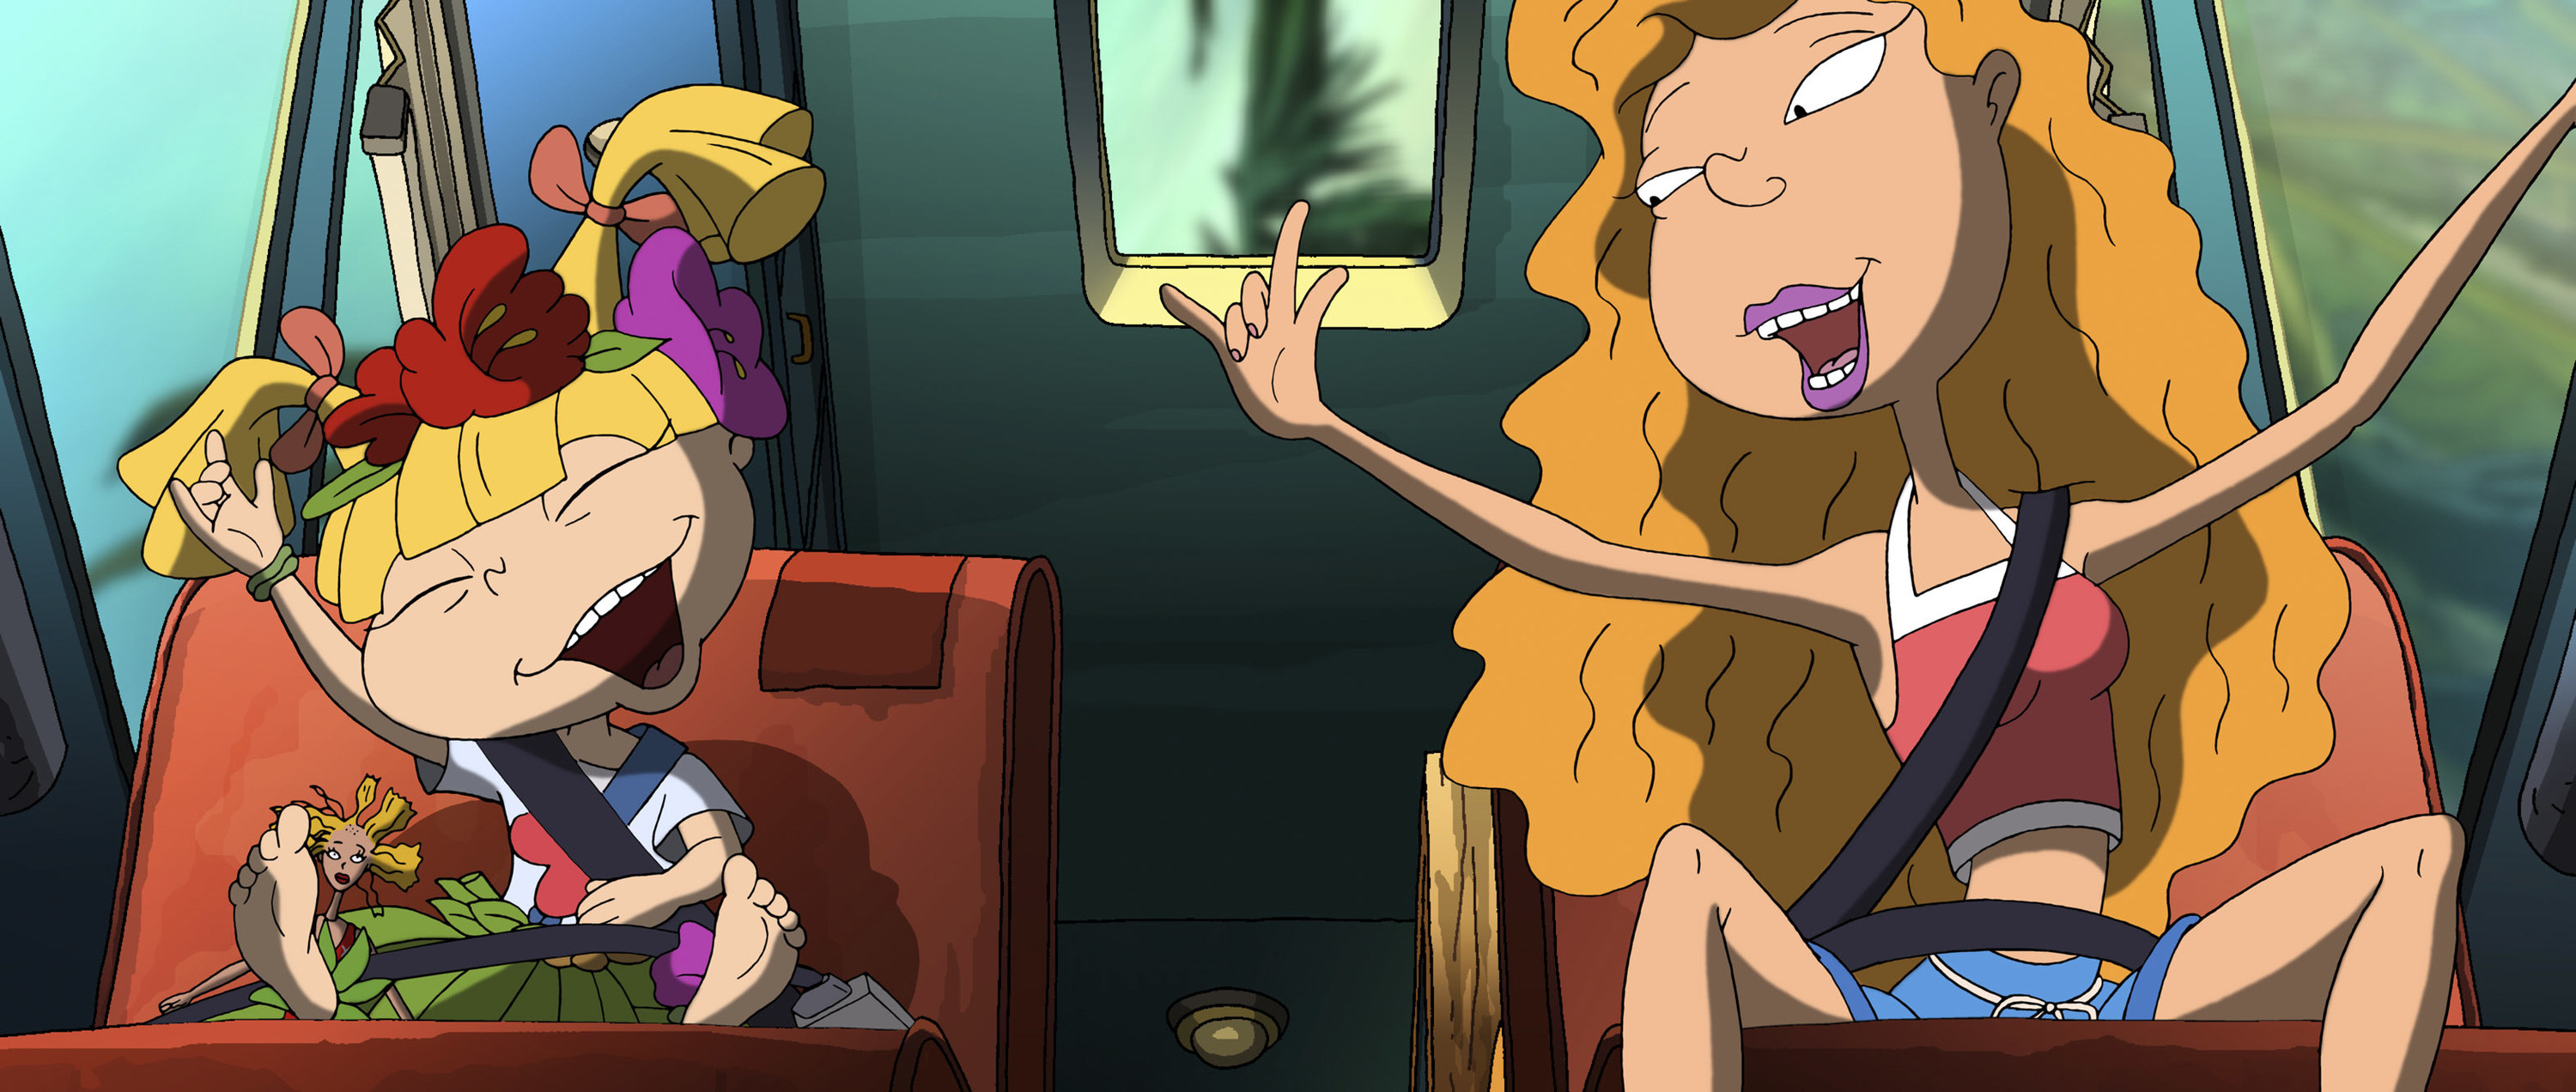 Debbie from &quot;The Wild Thornberrys&quot; drives Angelica from &quot;Rugrats&quot; while singing to the radio